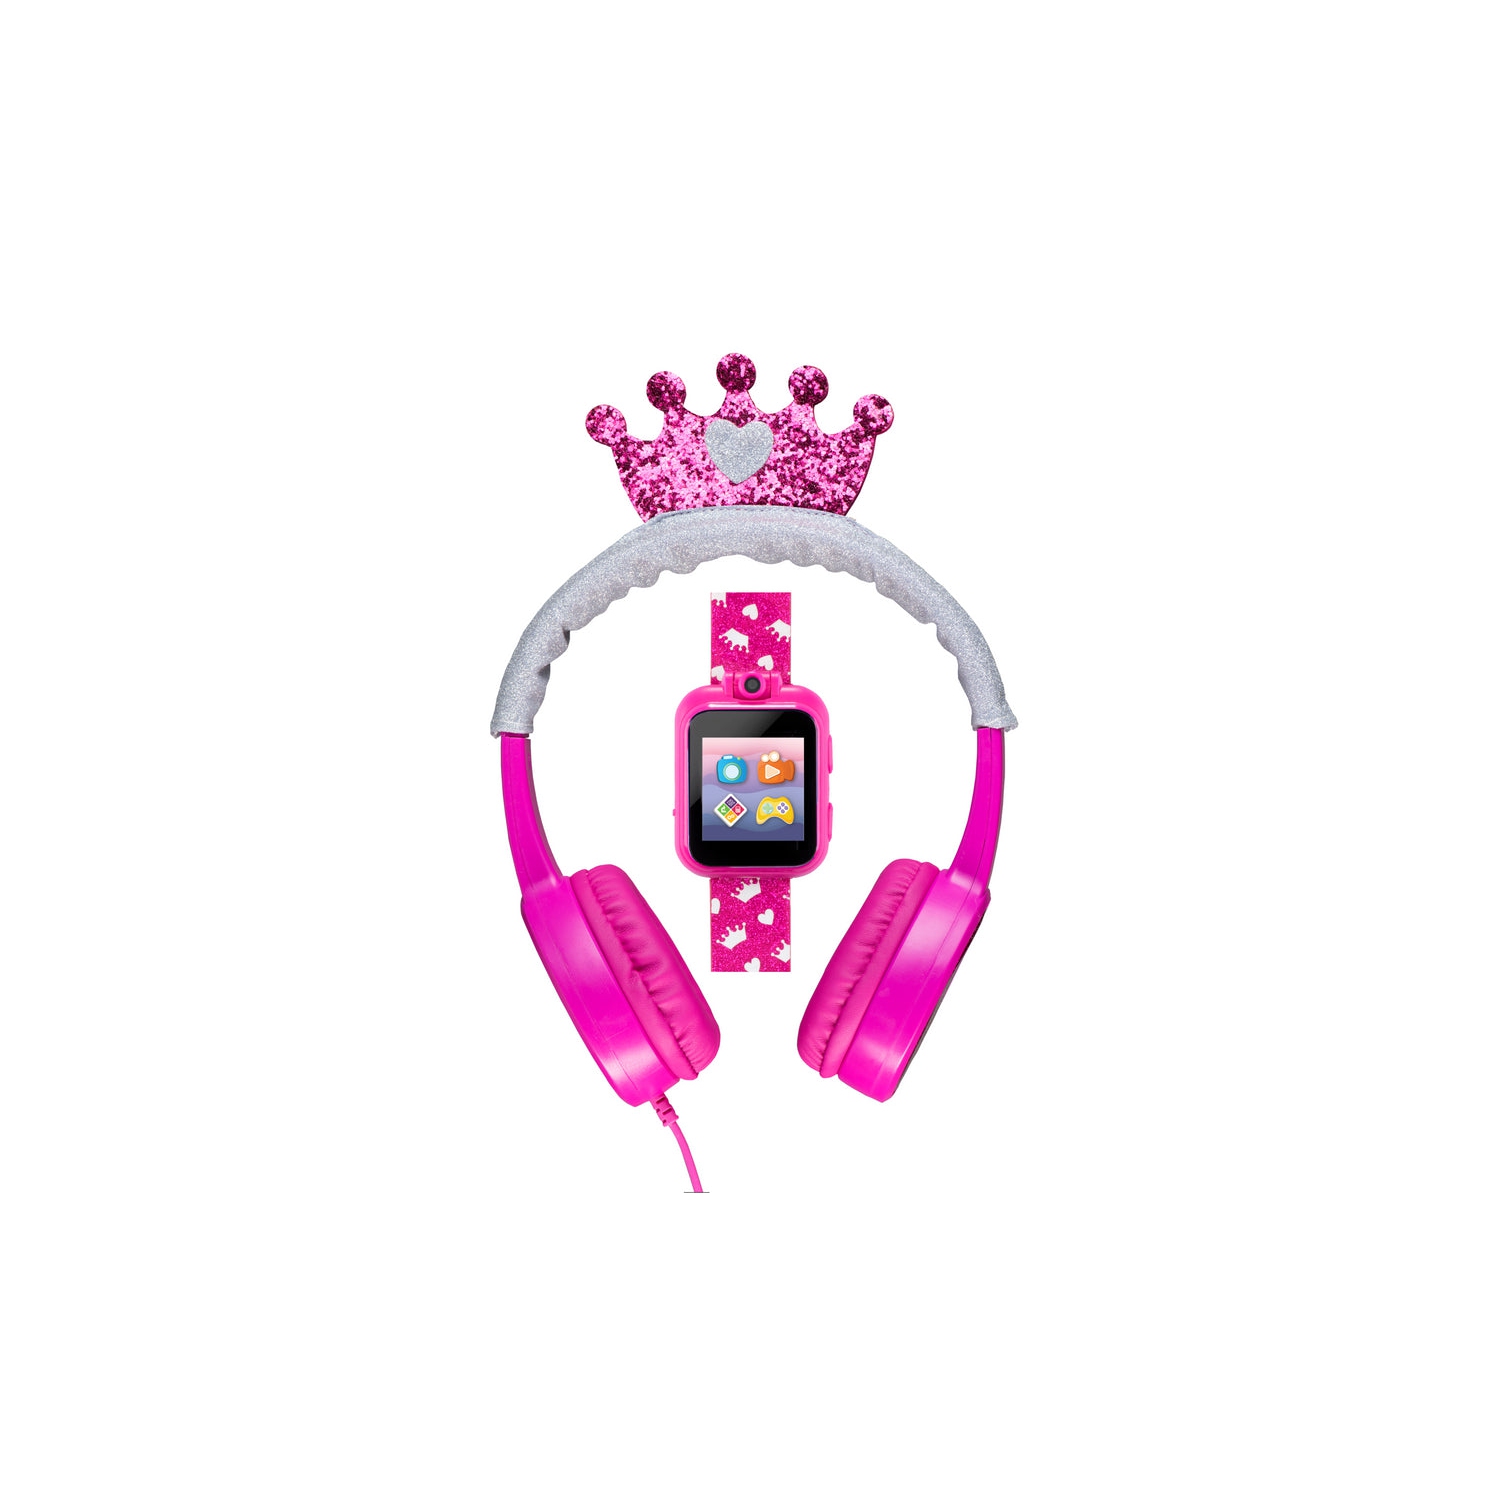 PlayZoom 2 Kids Smartwatch With Headphones: Fuchsia Multi With Crown